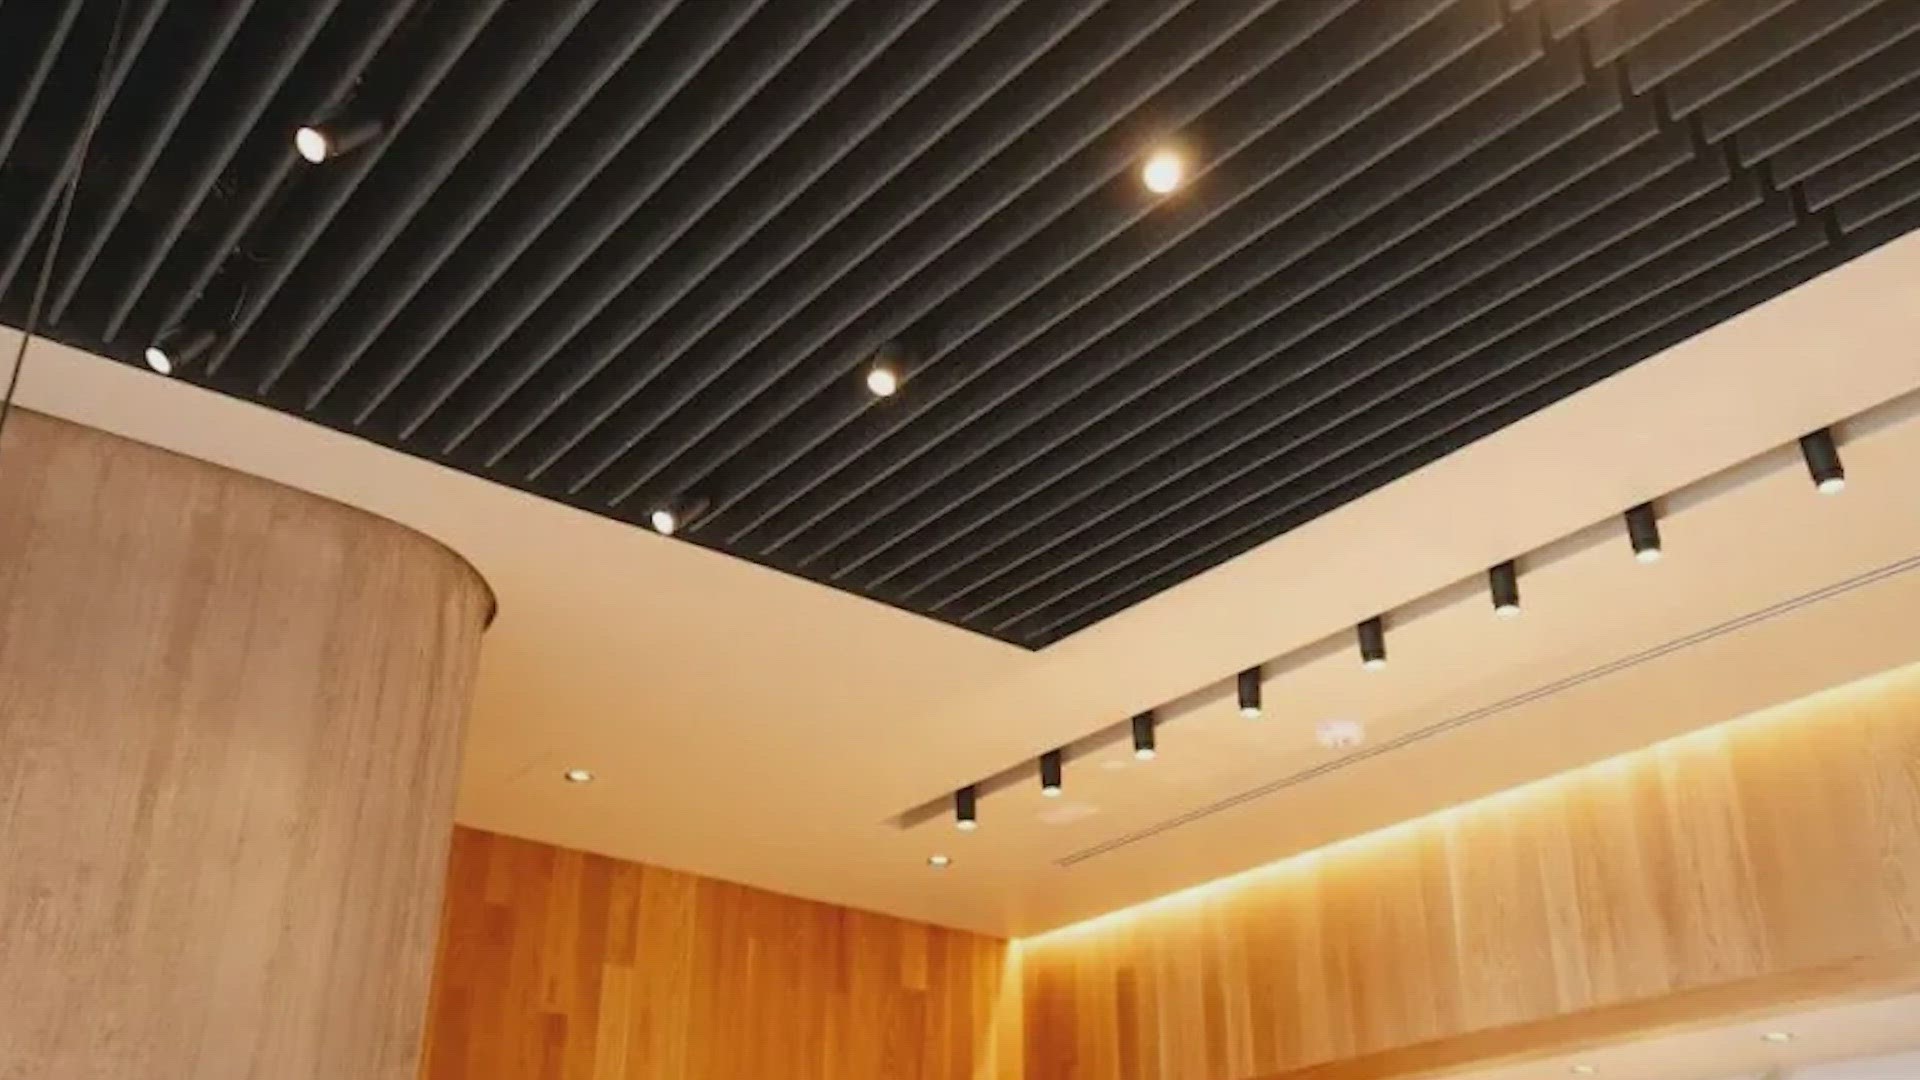 Reports say the coffee chain will add baffles to ceilings to help reduce noise and reverberations.